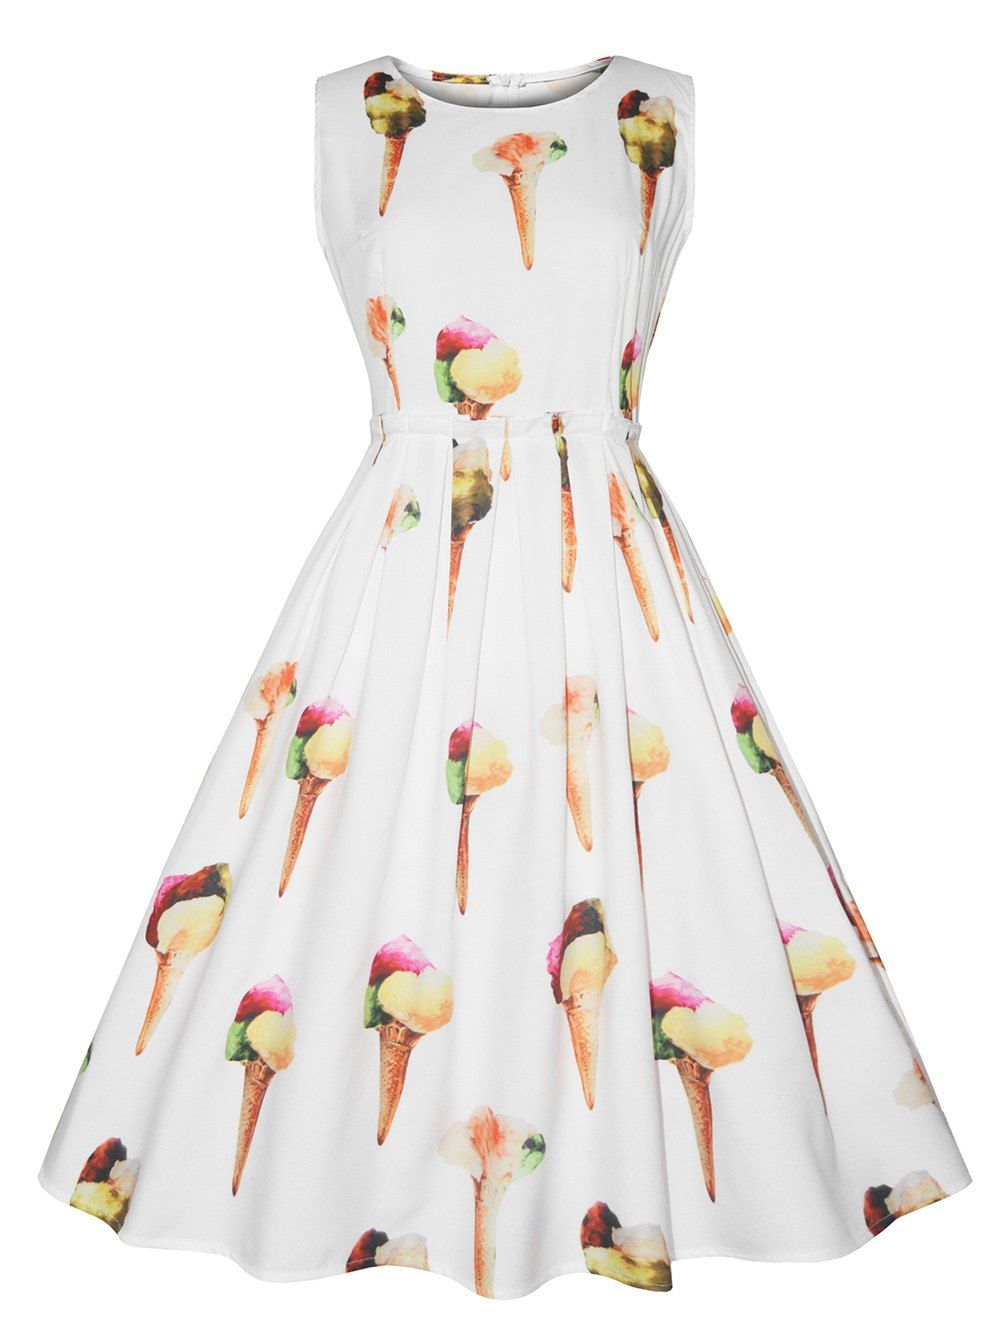 Fashion Vintage Ice Cream Print Fit and Flare Dress  